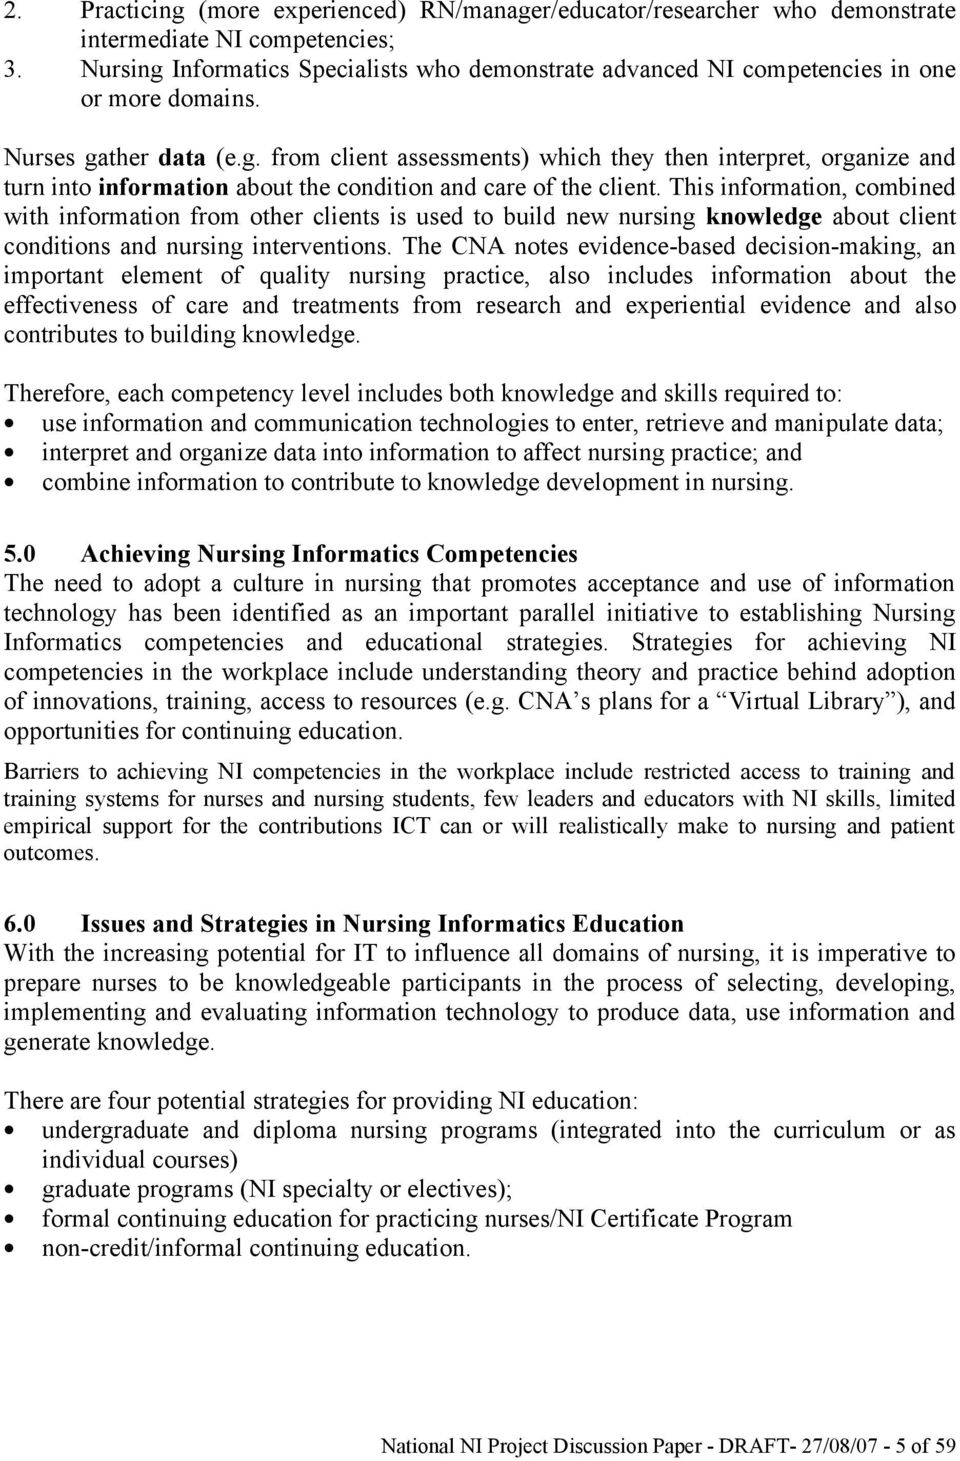 national nursing informatics project - discussion paper  draft